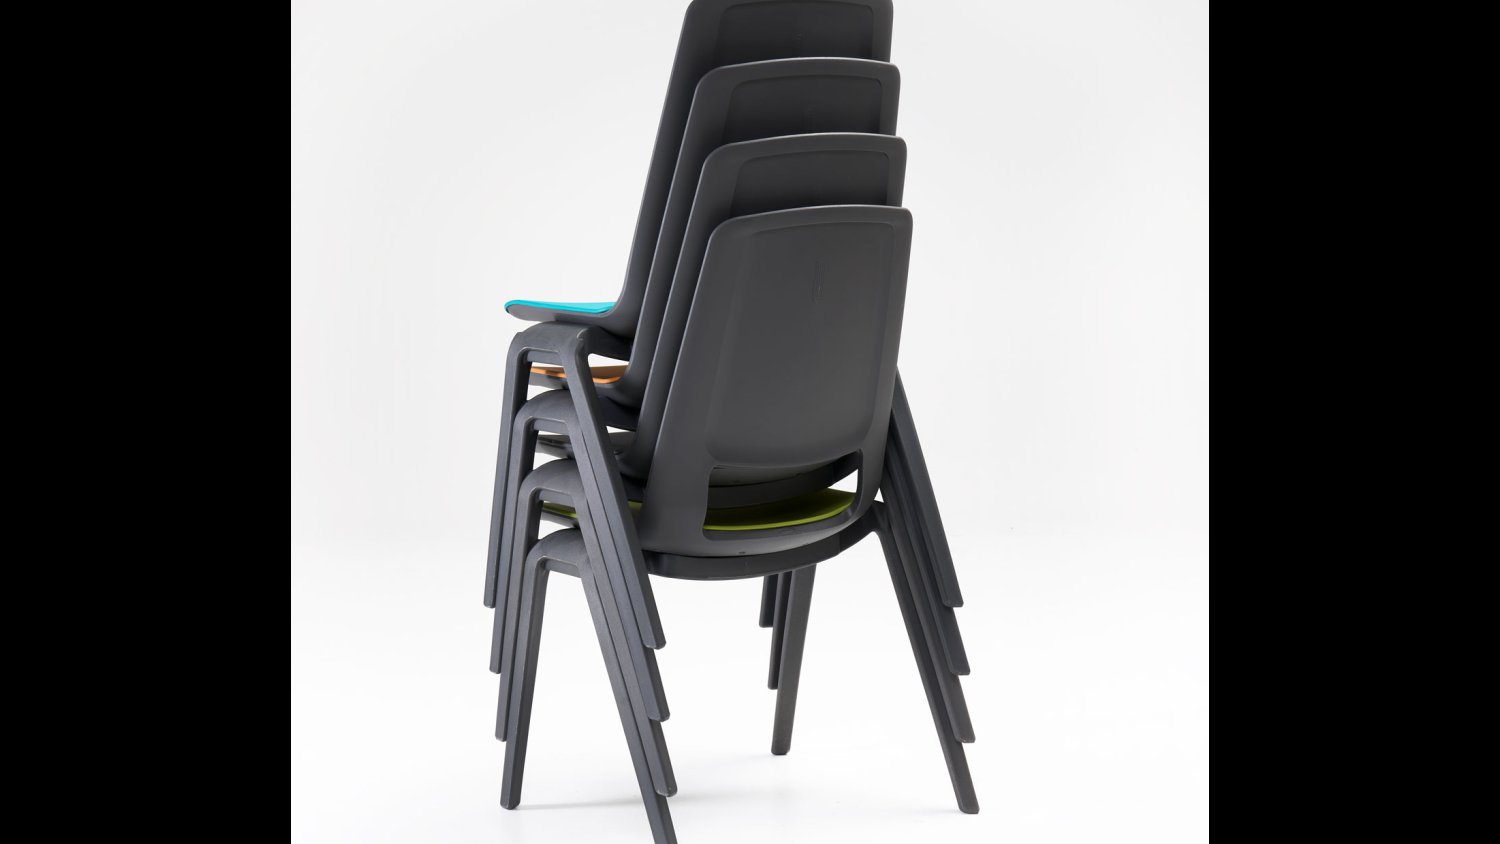 stackable chair